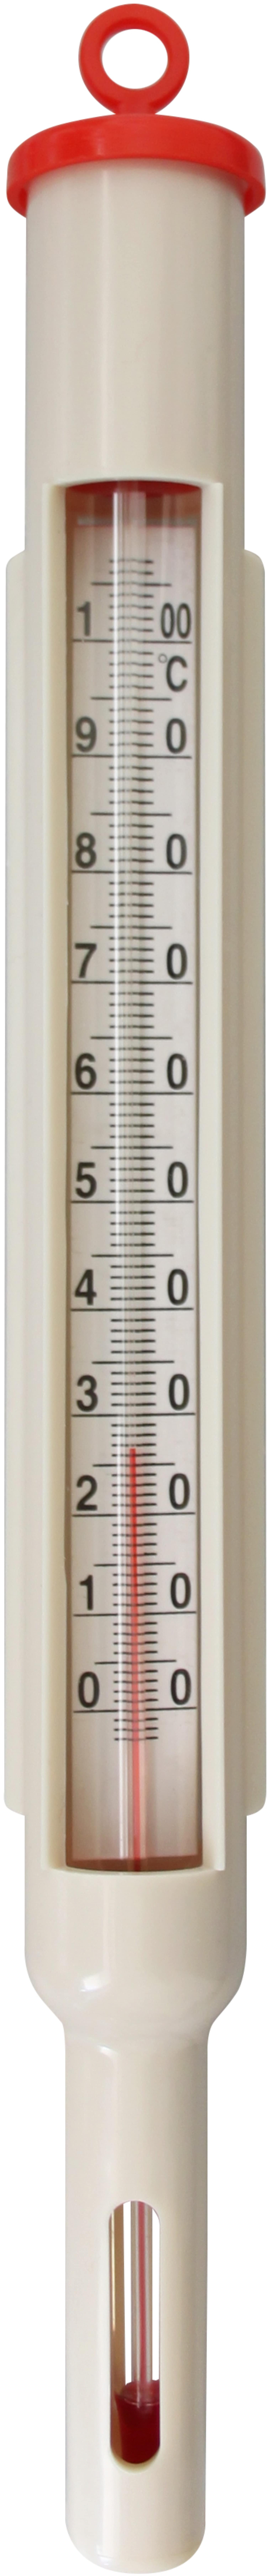 Thermometers 160012